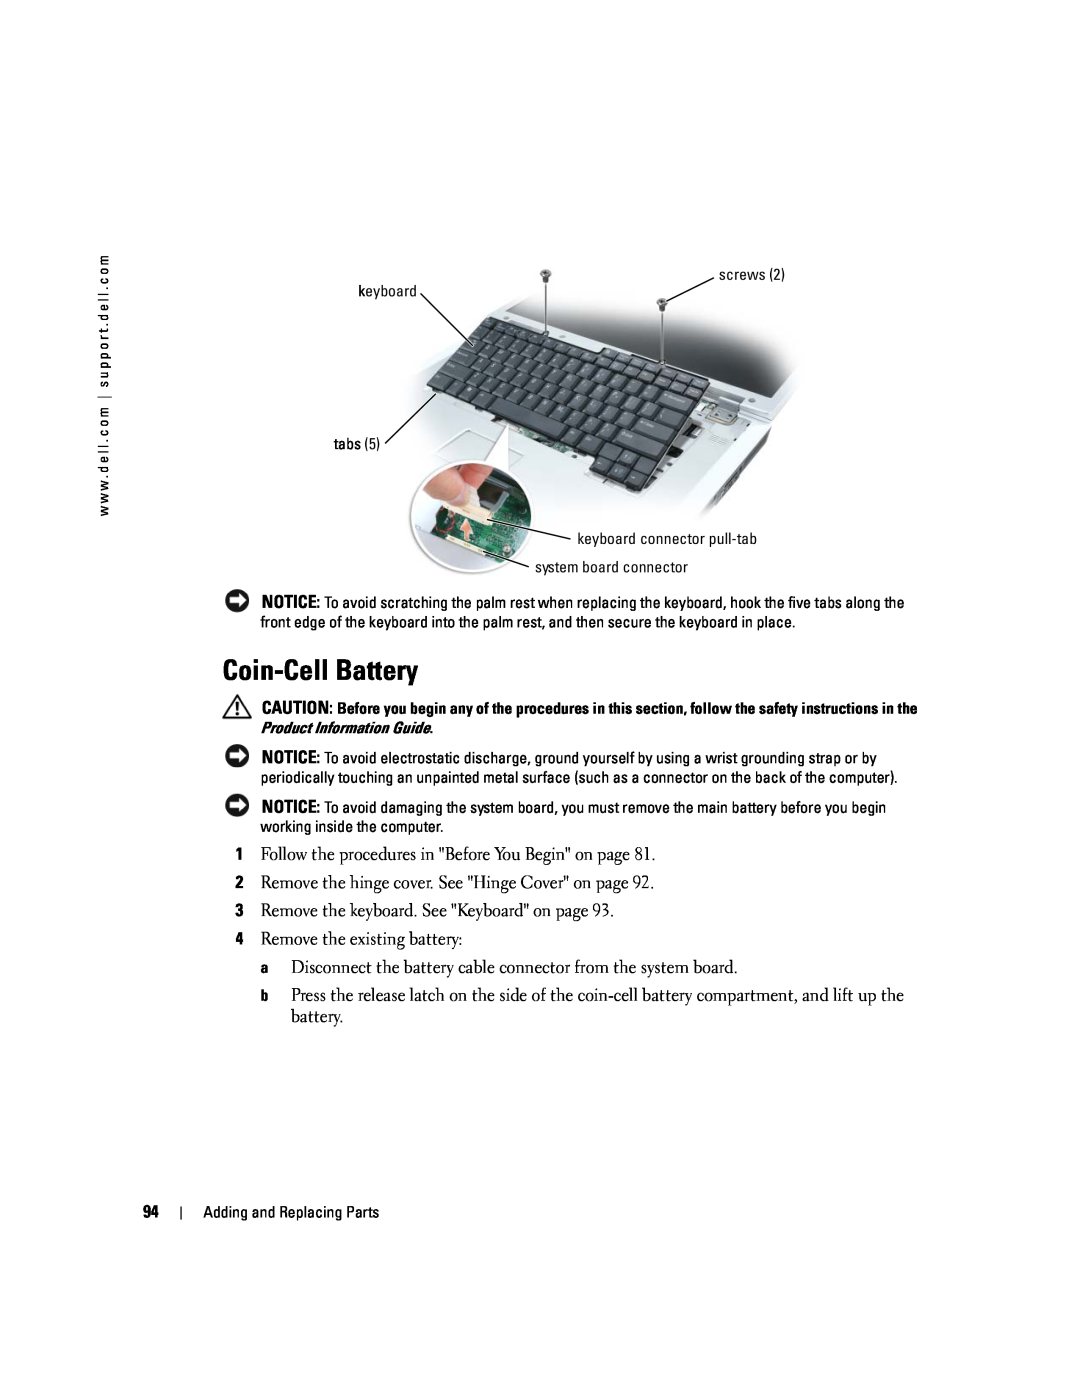 Dell 9300 Coin-Cell Battery, Follow the procedures in Before You Begin on page, Remove the keyboard. See Keyboard on page 